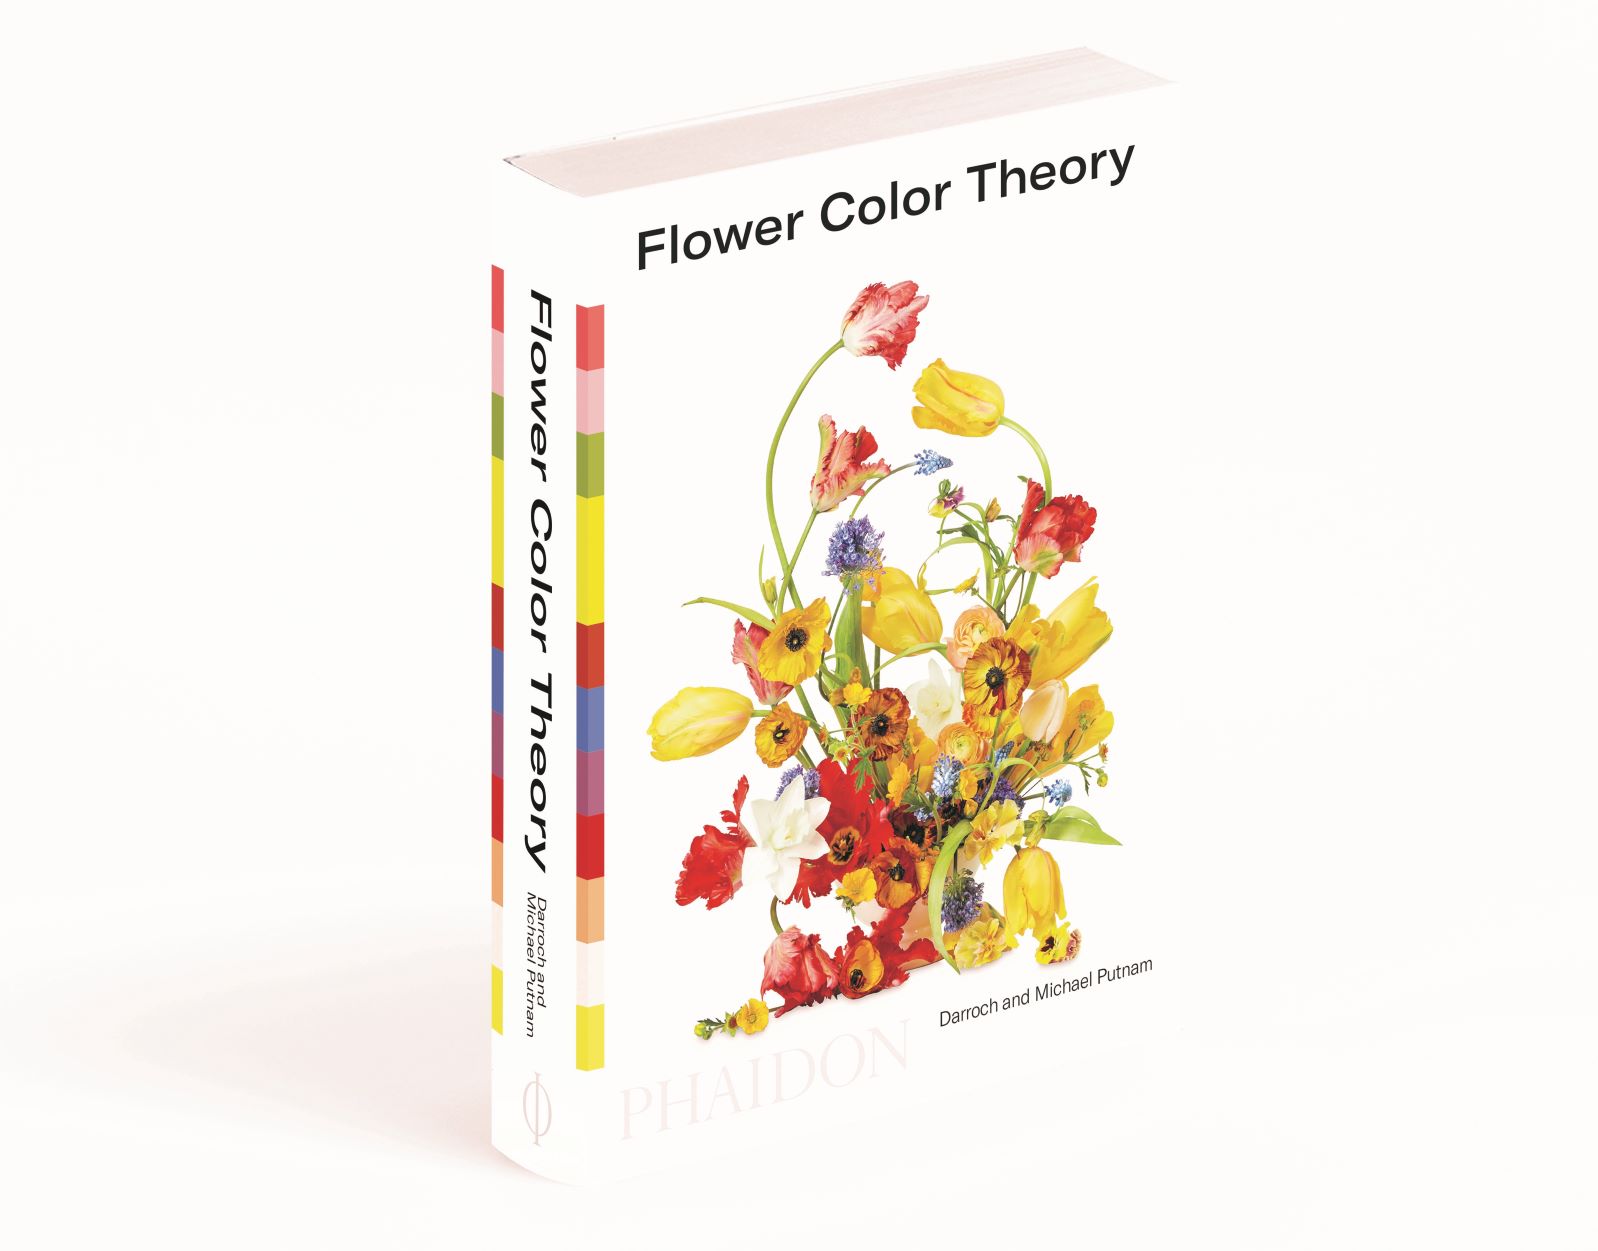 All you need to know about Flower Color Theory